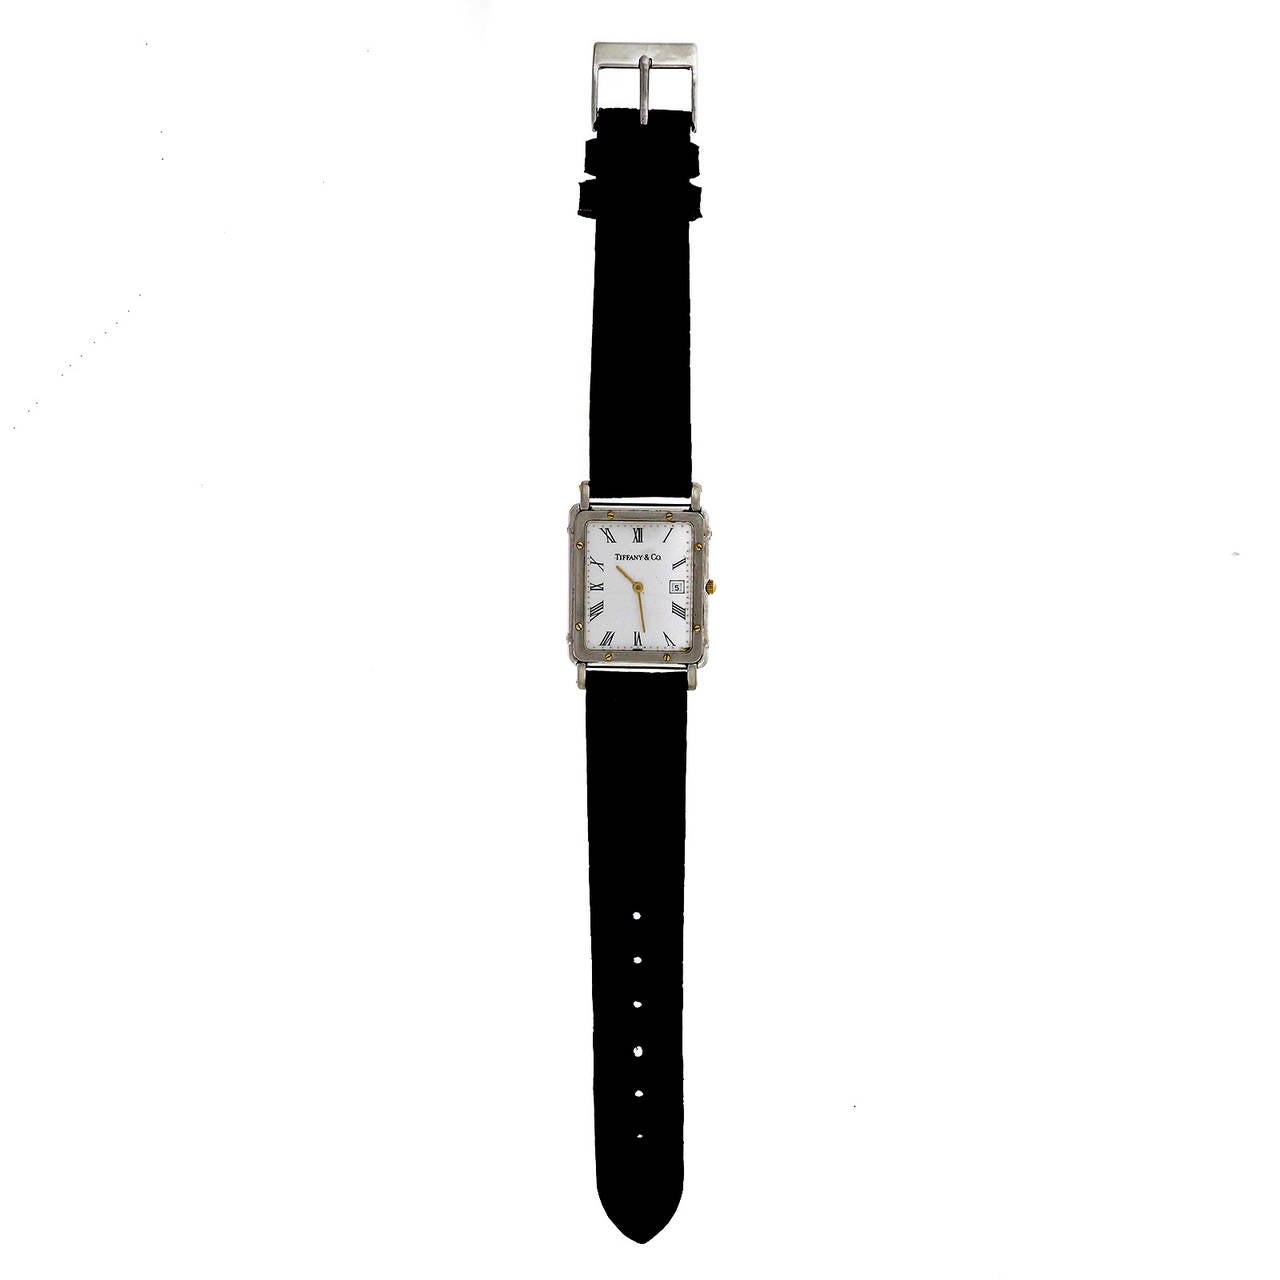 Tiffany & Co Stanless Steel Rectangular Quartz Wristwatch

Stainless Steel
Length: 36.95mm
Width: 25mm
Strap width at case: 18mm
Case thickness: 5.63mm
Outside case: 60057
Inside case: Alexis Barthelay Paris Geneve OR 18k ET Acier
Movement: